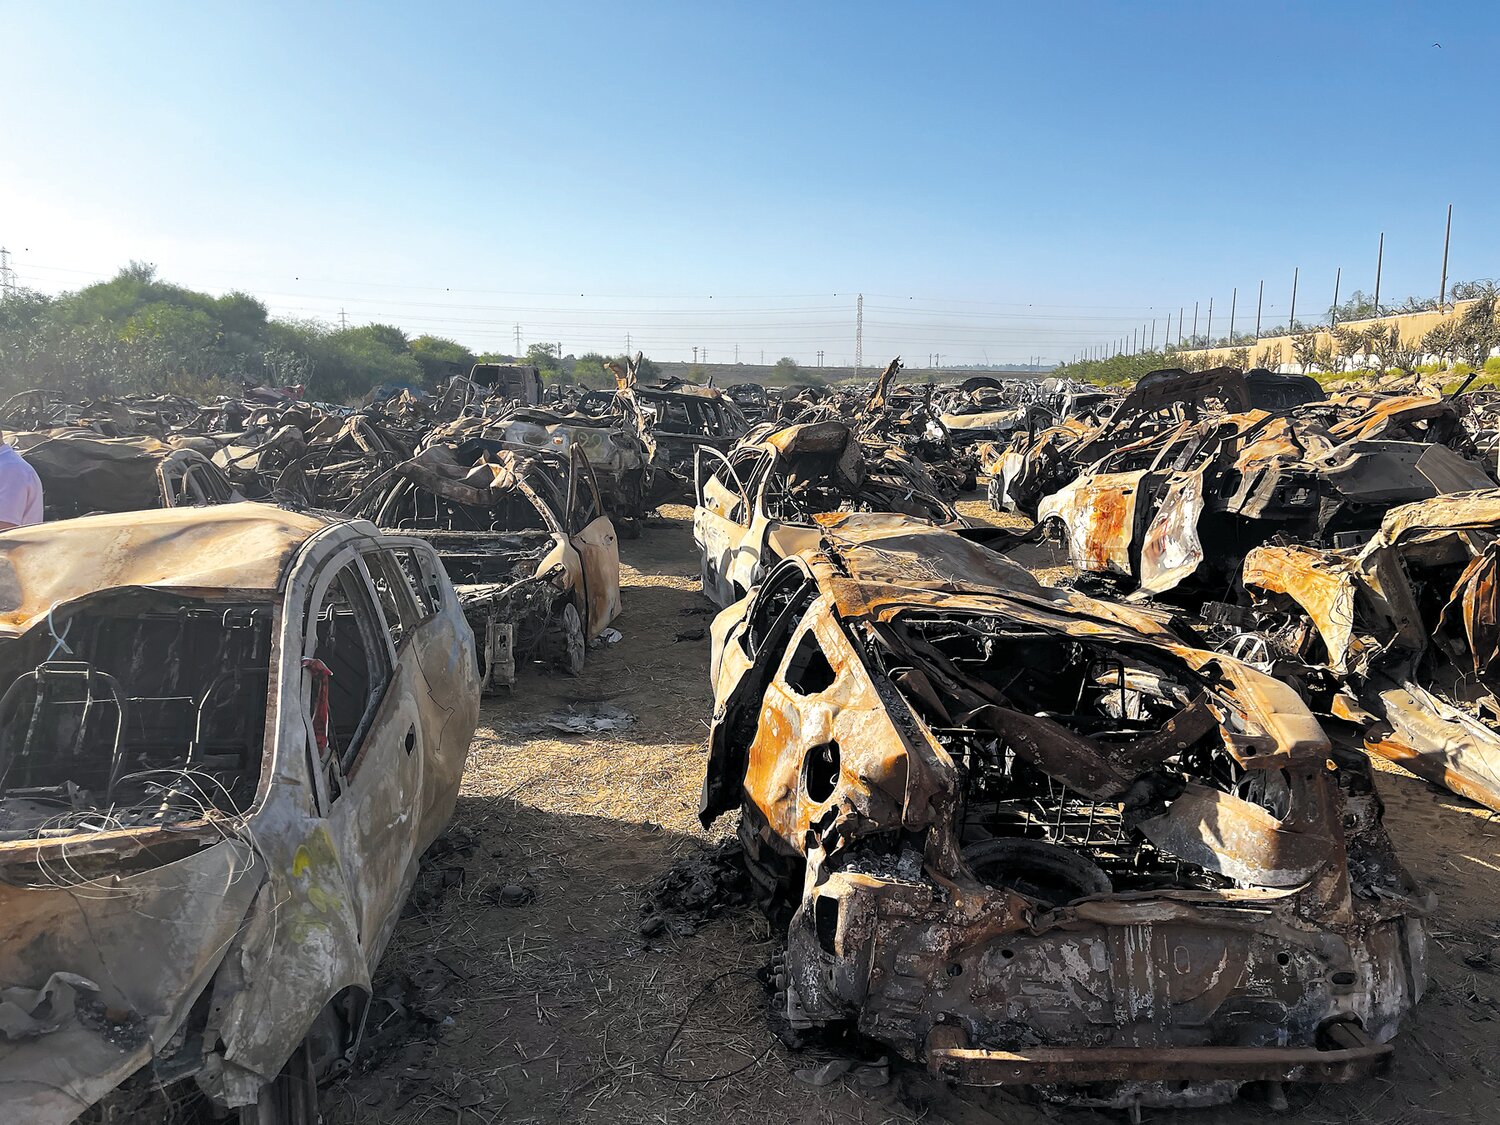 During the Solidarity Mission, the Rabbis were shown the sprawling locations where more than 1,000 cars were taken following the attacks. Hamas reportedly torched the vehicles and shot at those inside.